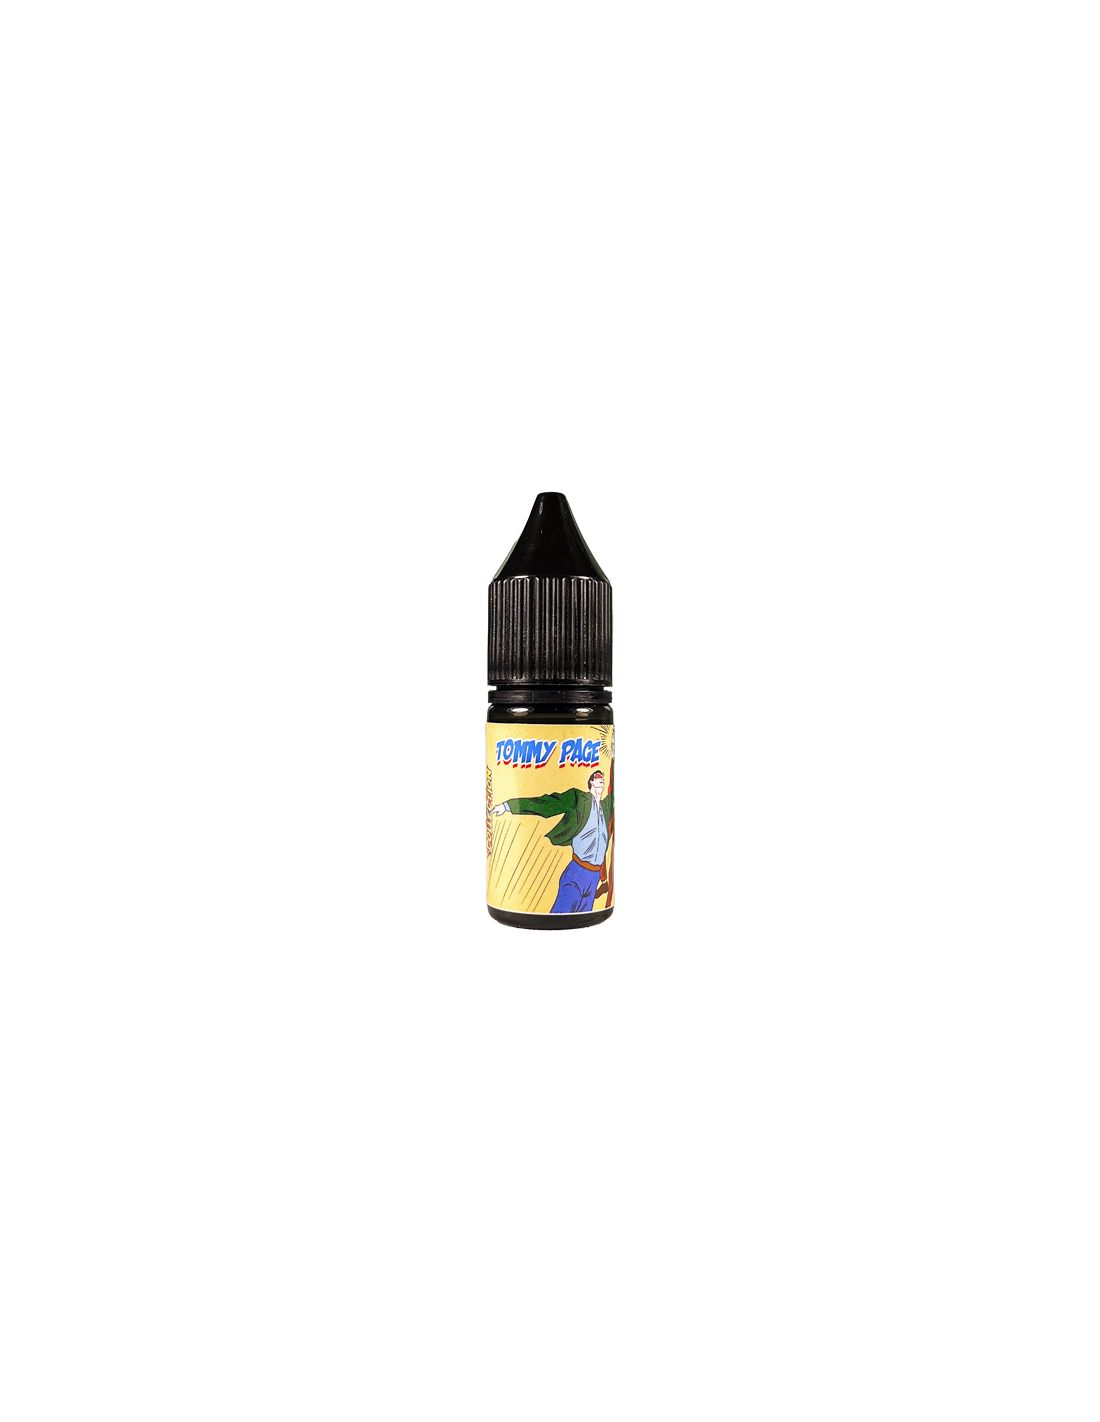 Easy Vape Tommy Page Comics Collection Aroma Concentrato 10ml Frappè Banana Kiwi Ice